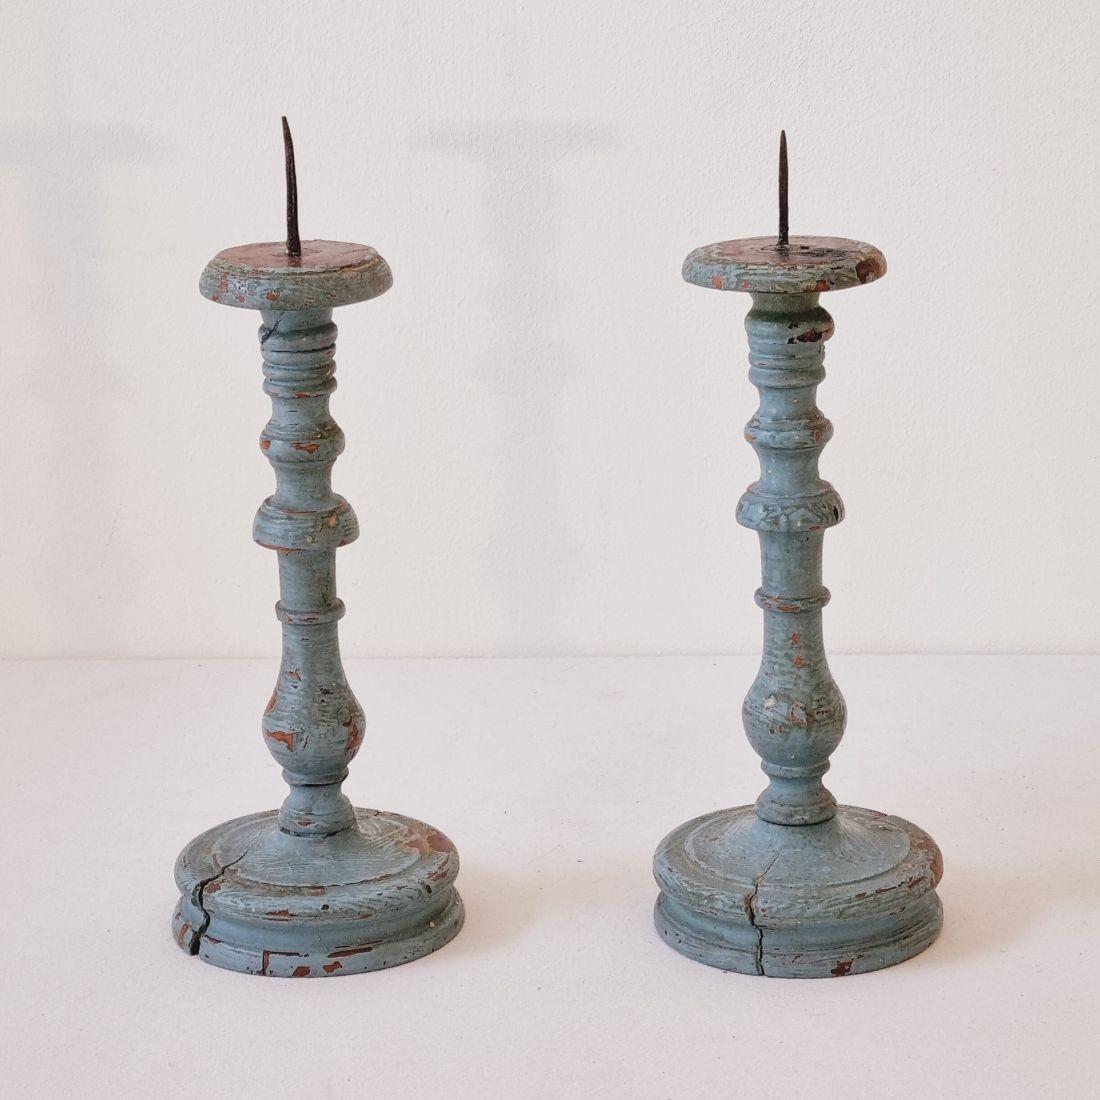 Wonderful and very pure pair of turned wooden candlesticks with their beautiful old blue color.
Corsica, France circa 1750. Weathered and small losses.